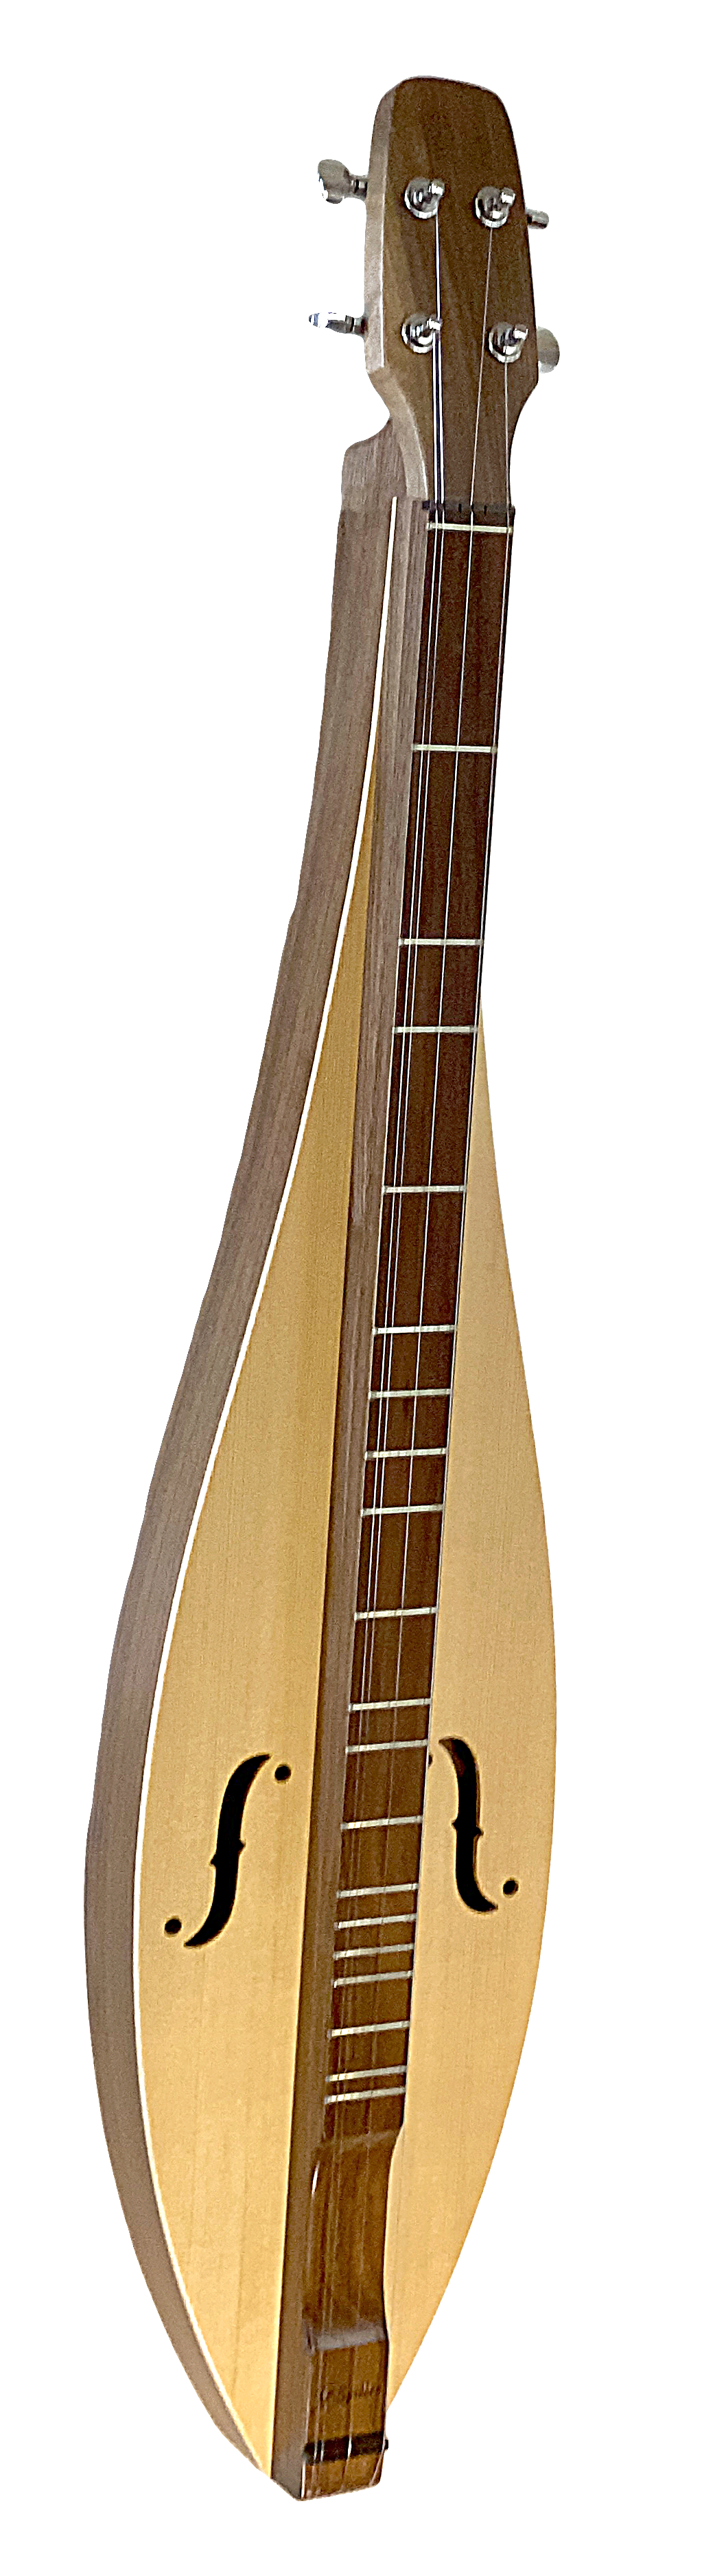 A 4 String, Flathead, Teardrop with Walnut back and sides, Spruce top (4FTWS), a handcrafted instrument with a lifetime warranty, on a white background.